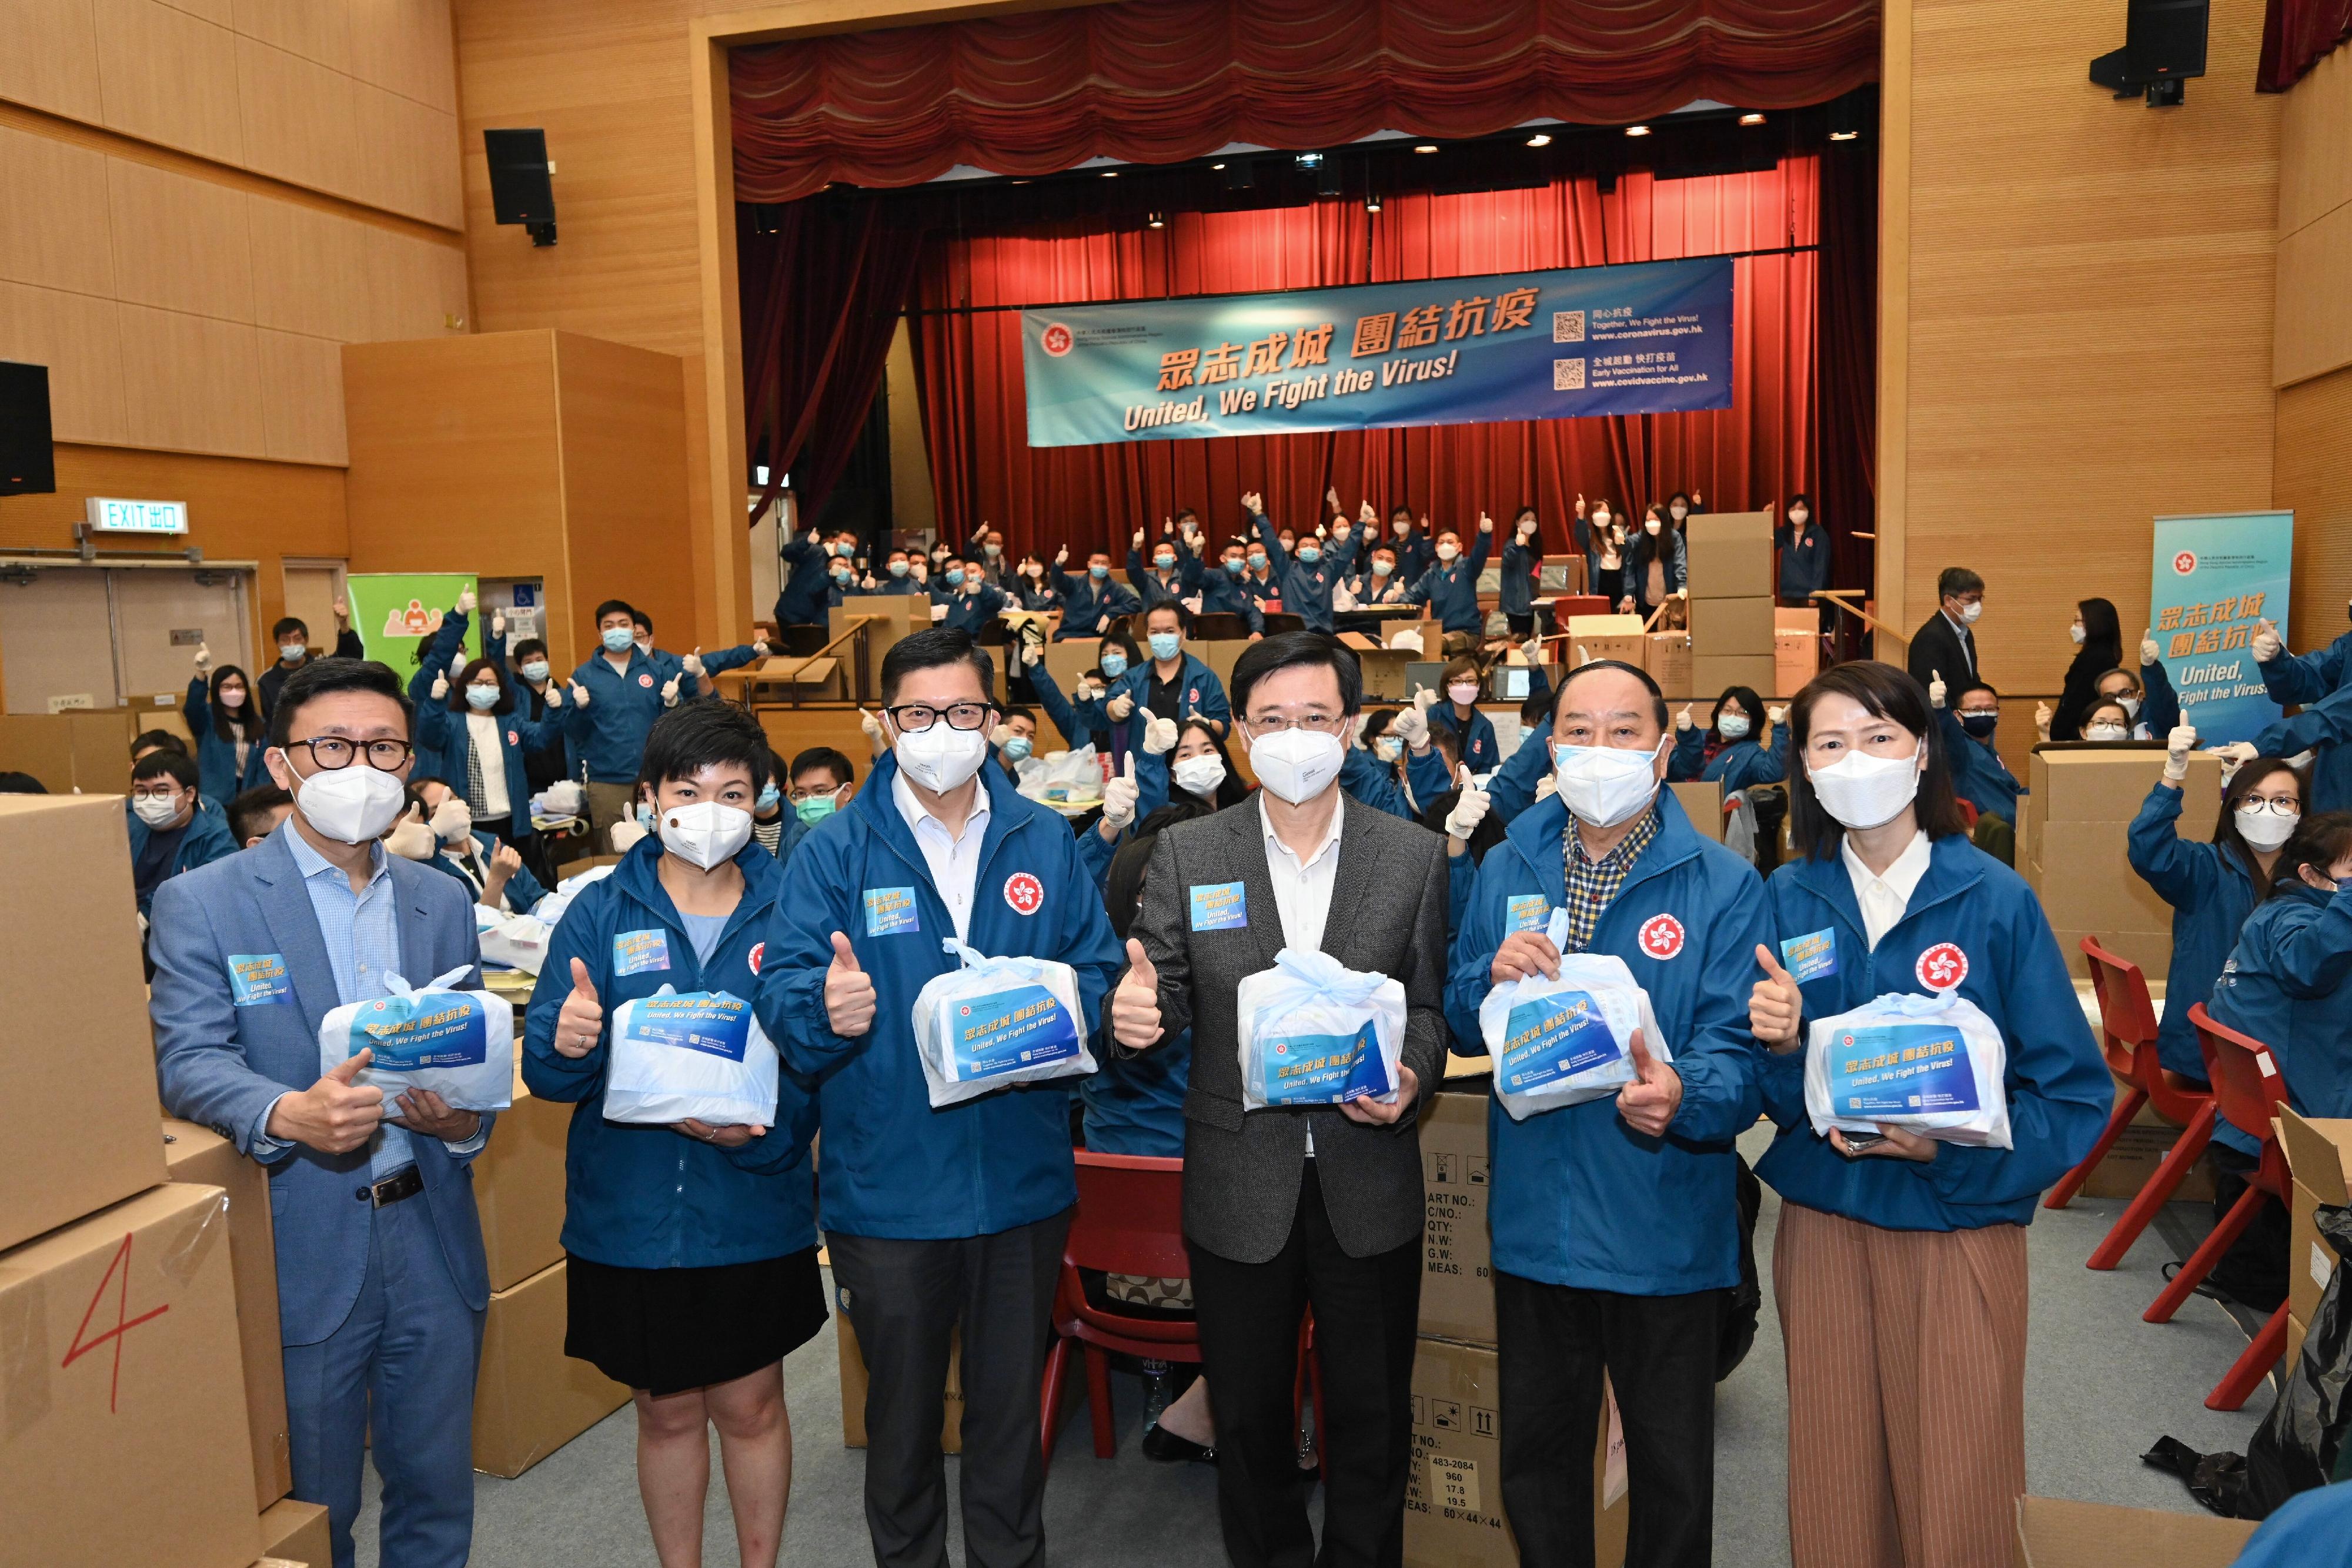 The Chief Secretary for Administration, Mr John Lee, today (March 30) visited the anti-epidemic service bag packaging centres located at Lai Kok Community Hall in Sham Shui Po and the Hong Kong Heritage Museum in Sha Tin to show his support for civil service colleagues and volunteers from different sectors of the community. Photo shows Mr Lee (third right); the Secretary for Security, Mr Tang Ping-keung (fourth right); and other staff members at the anti-epidemic service bag packaging centre located at Lai Kok Community Hall.